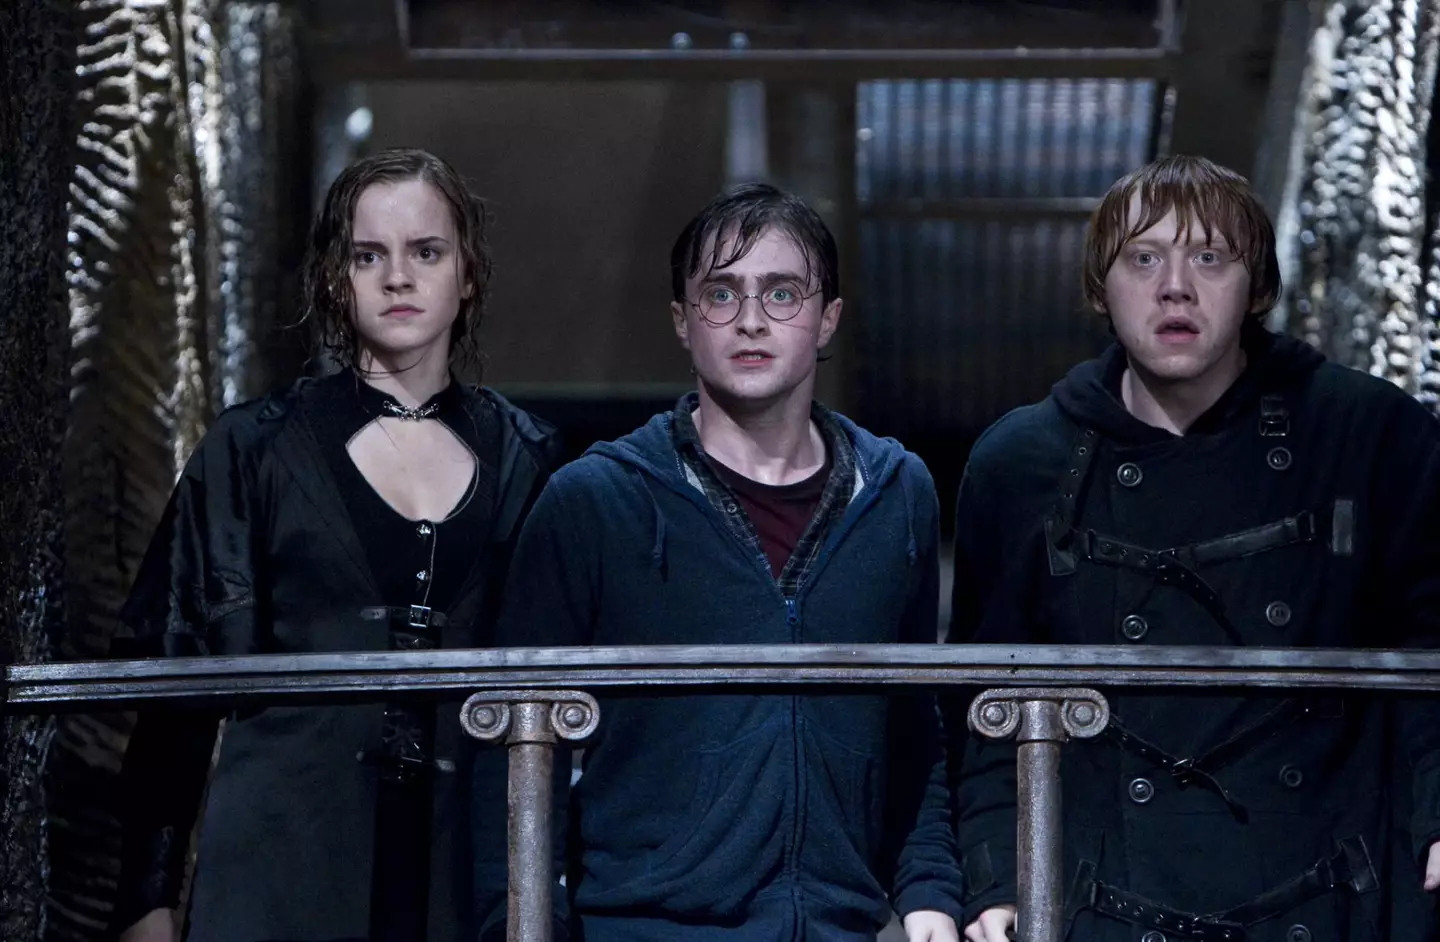 Who could possibly step into the shoes of Harry, Ron and Hermione?